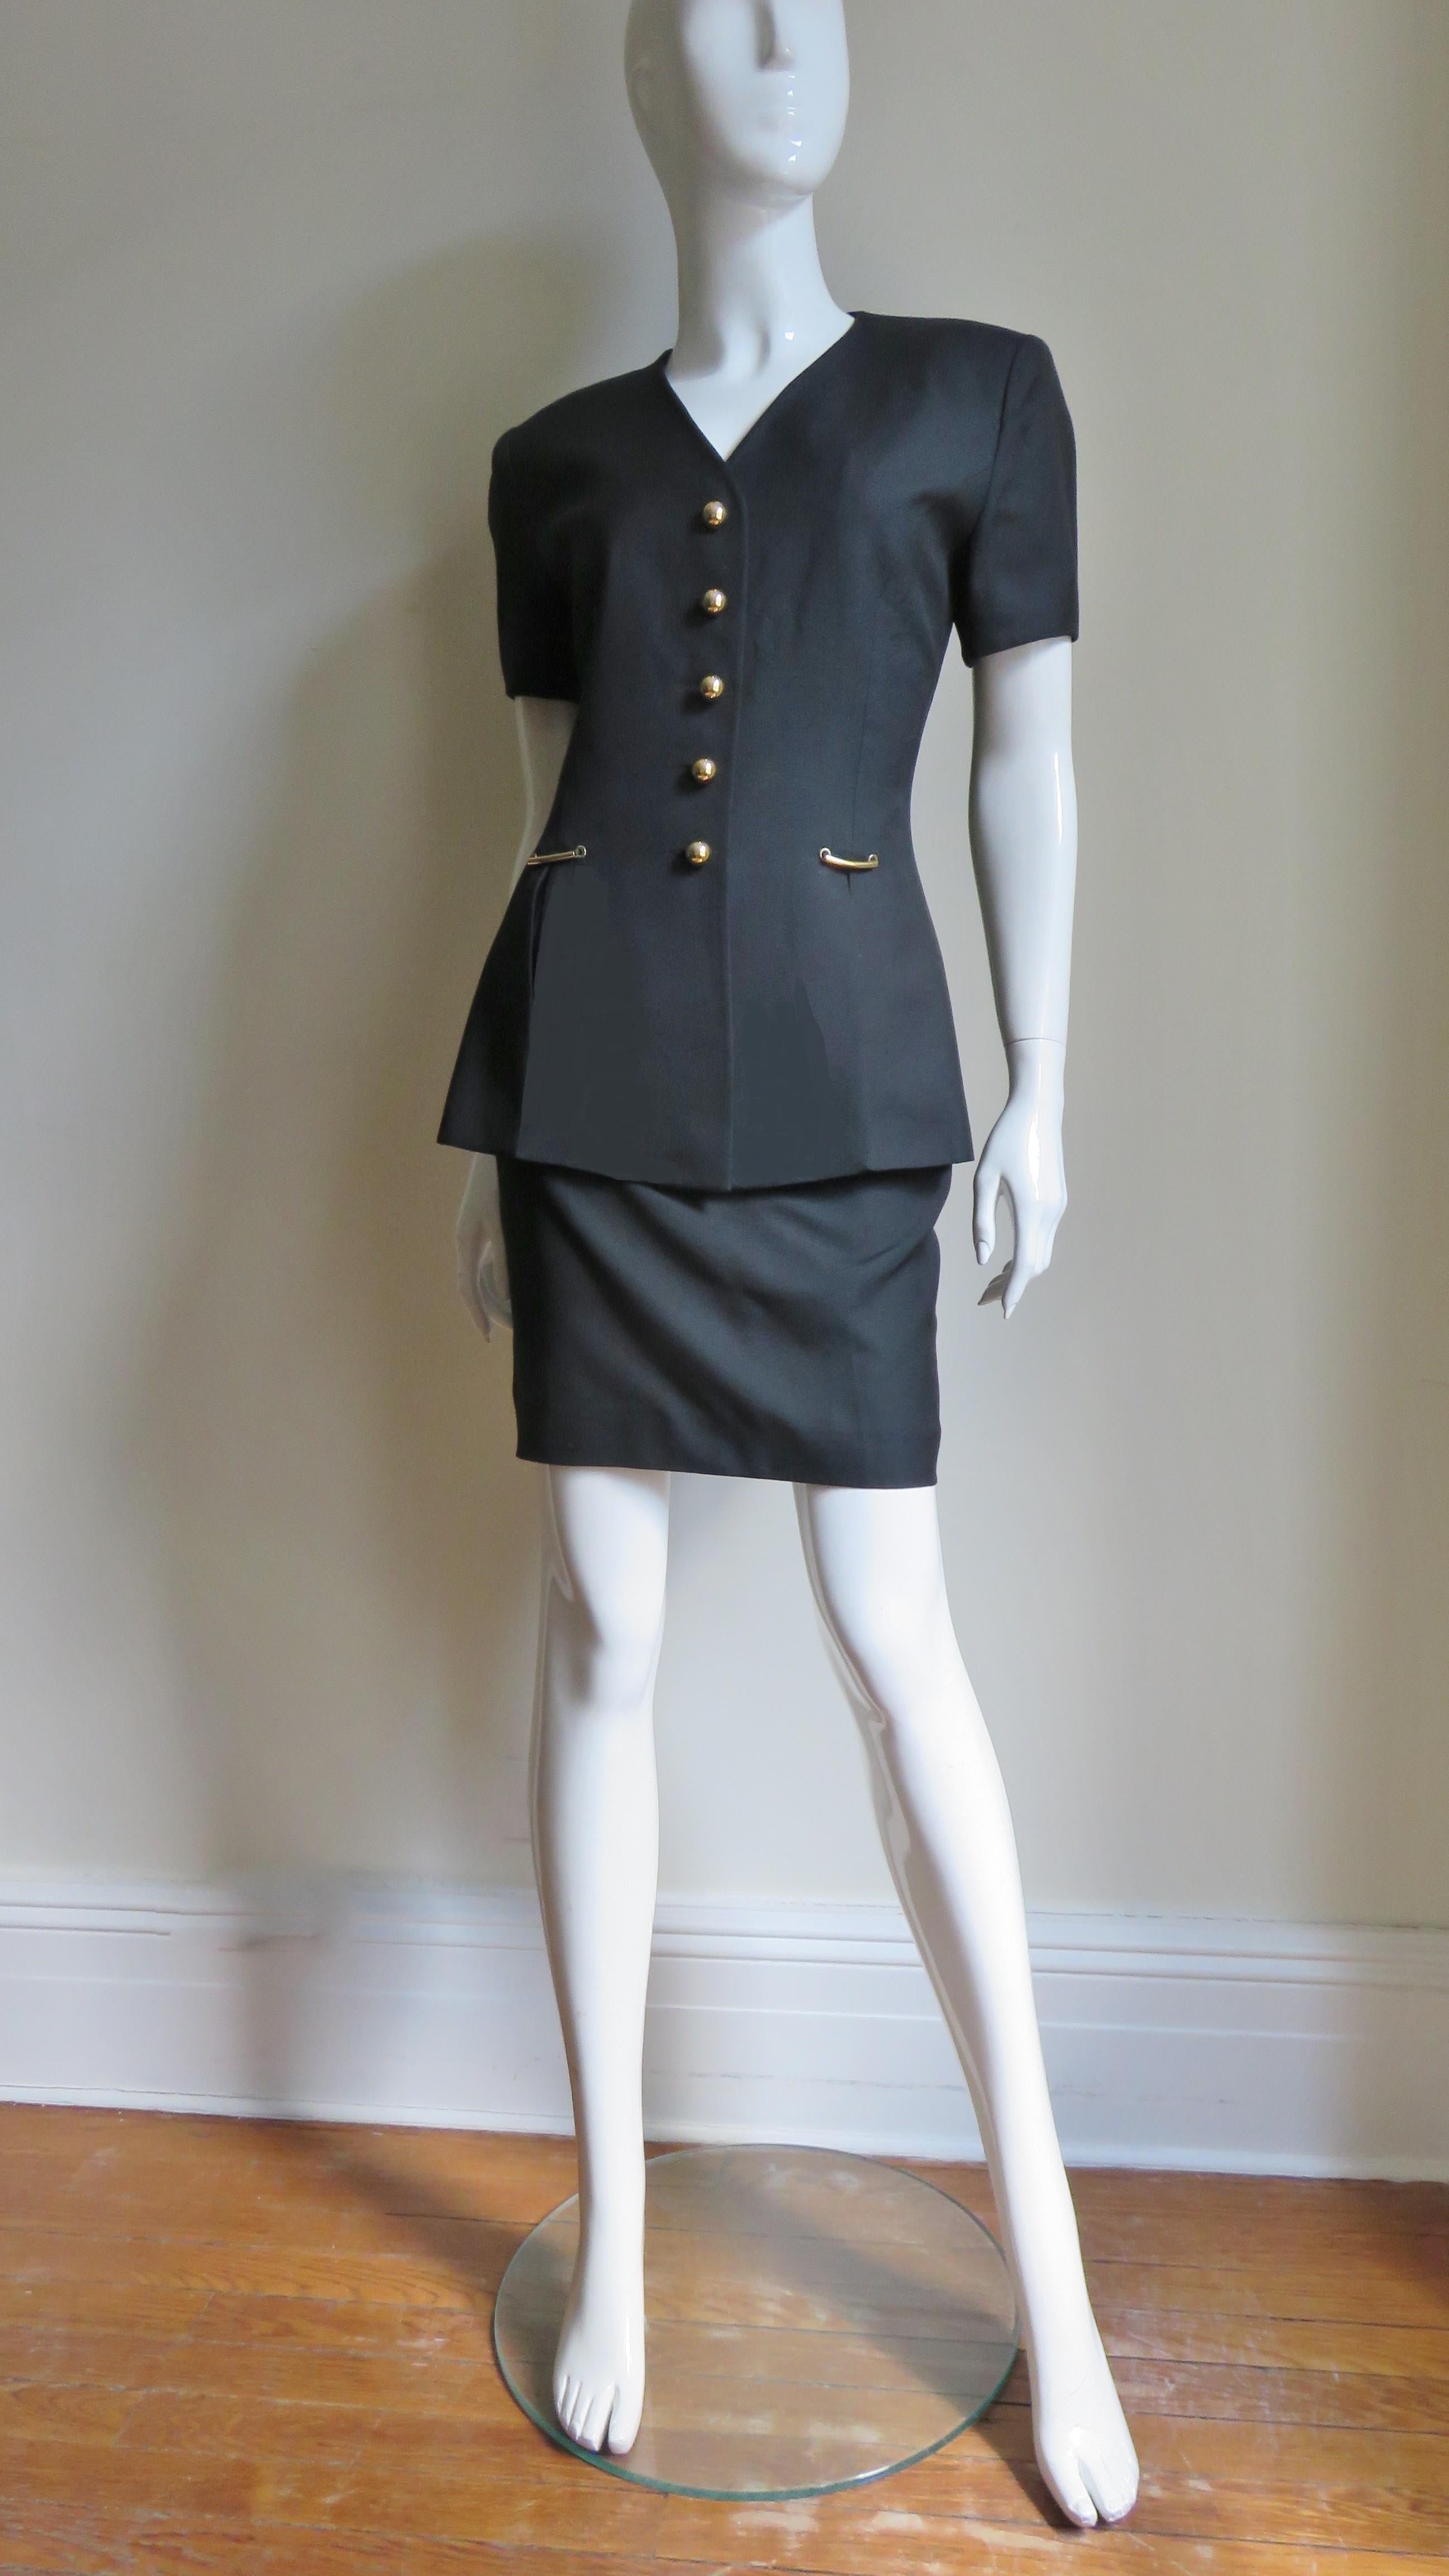 Gianfranco Ferre Skirt Suit with Cut out Jacket 3